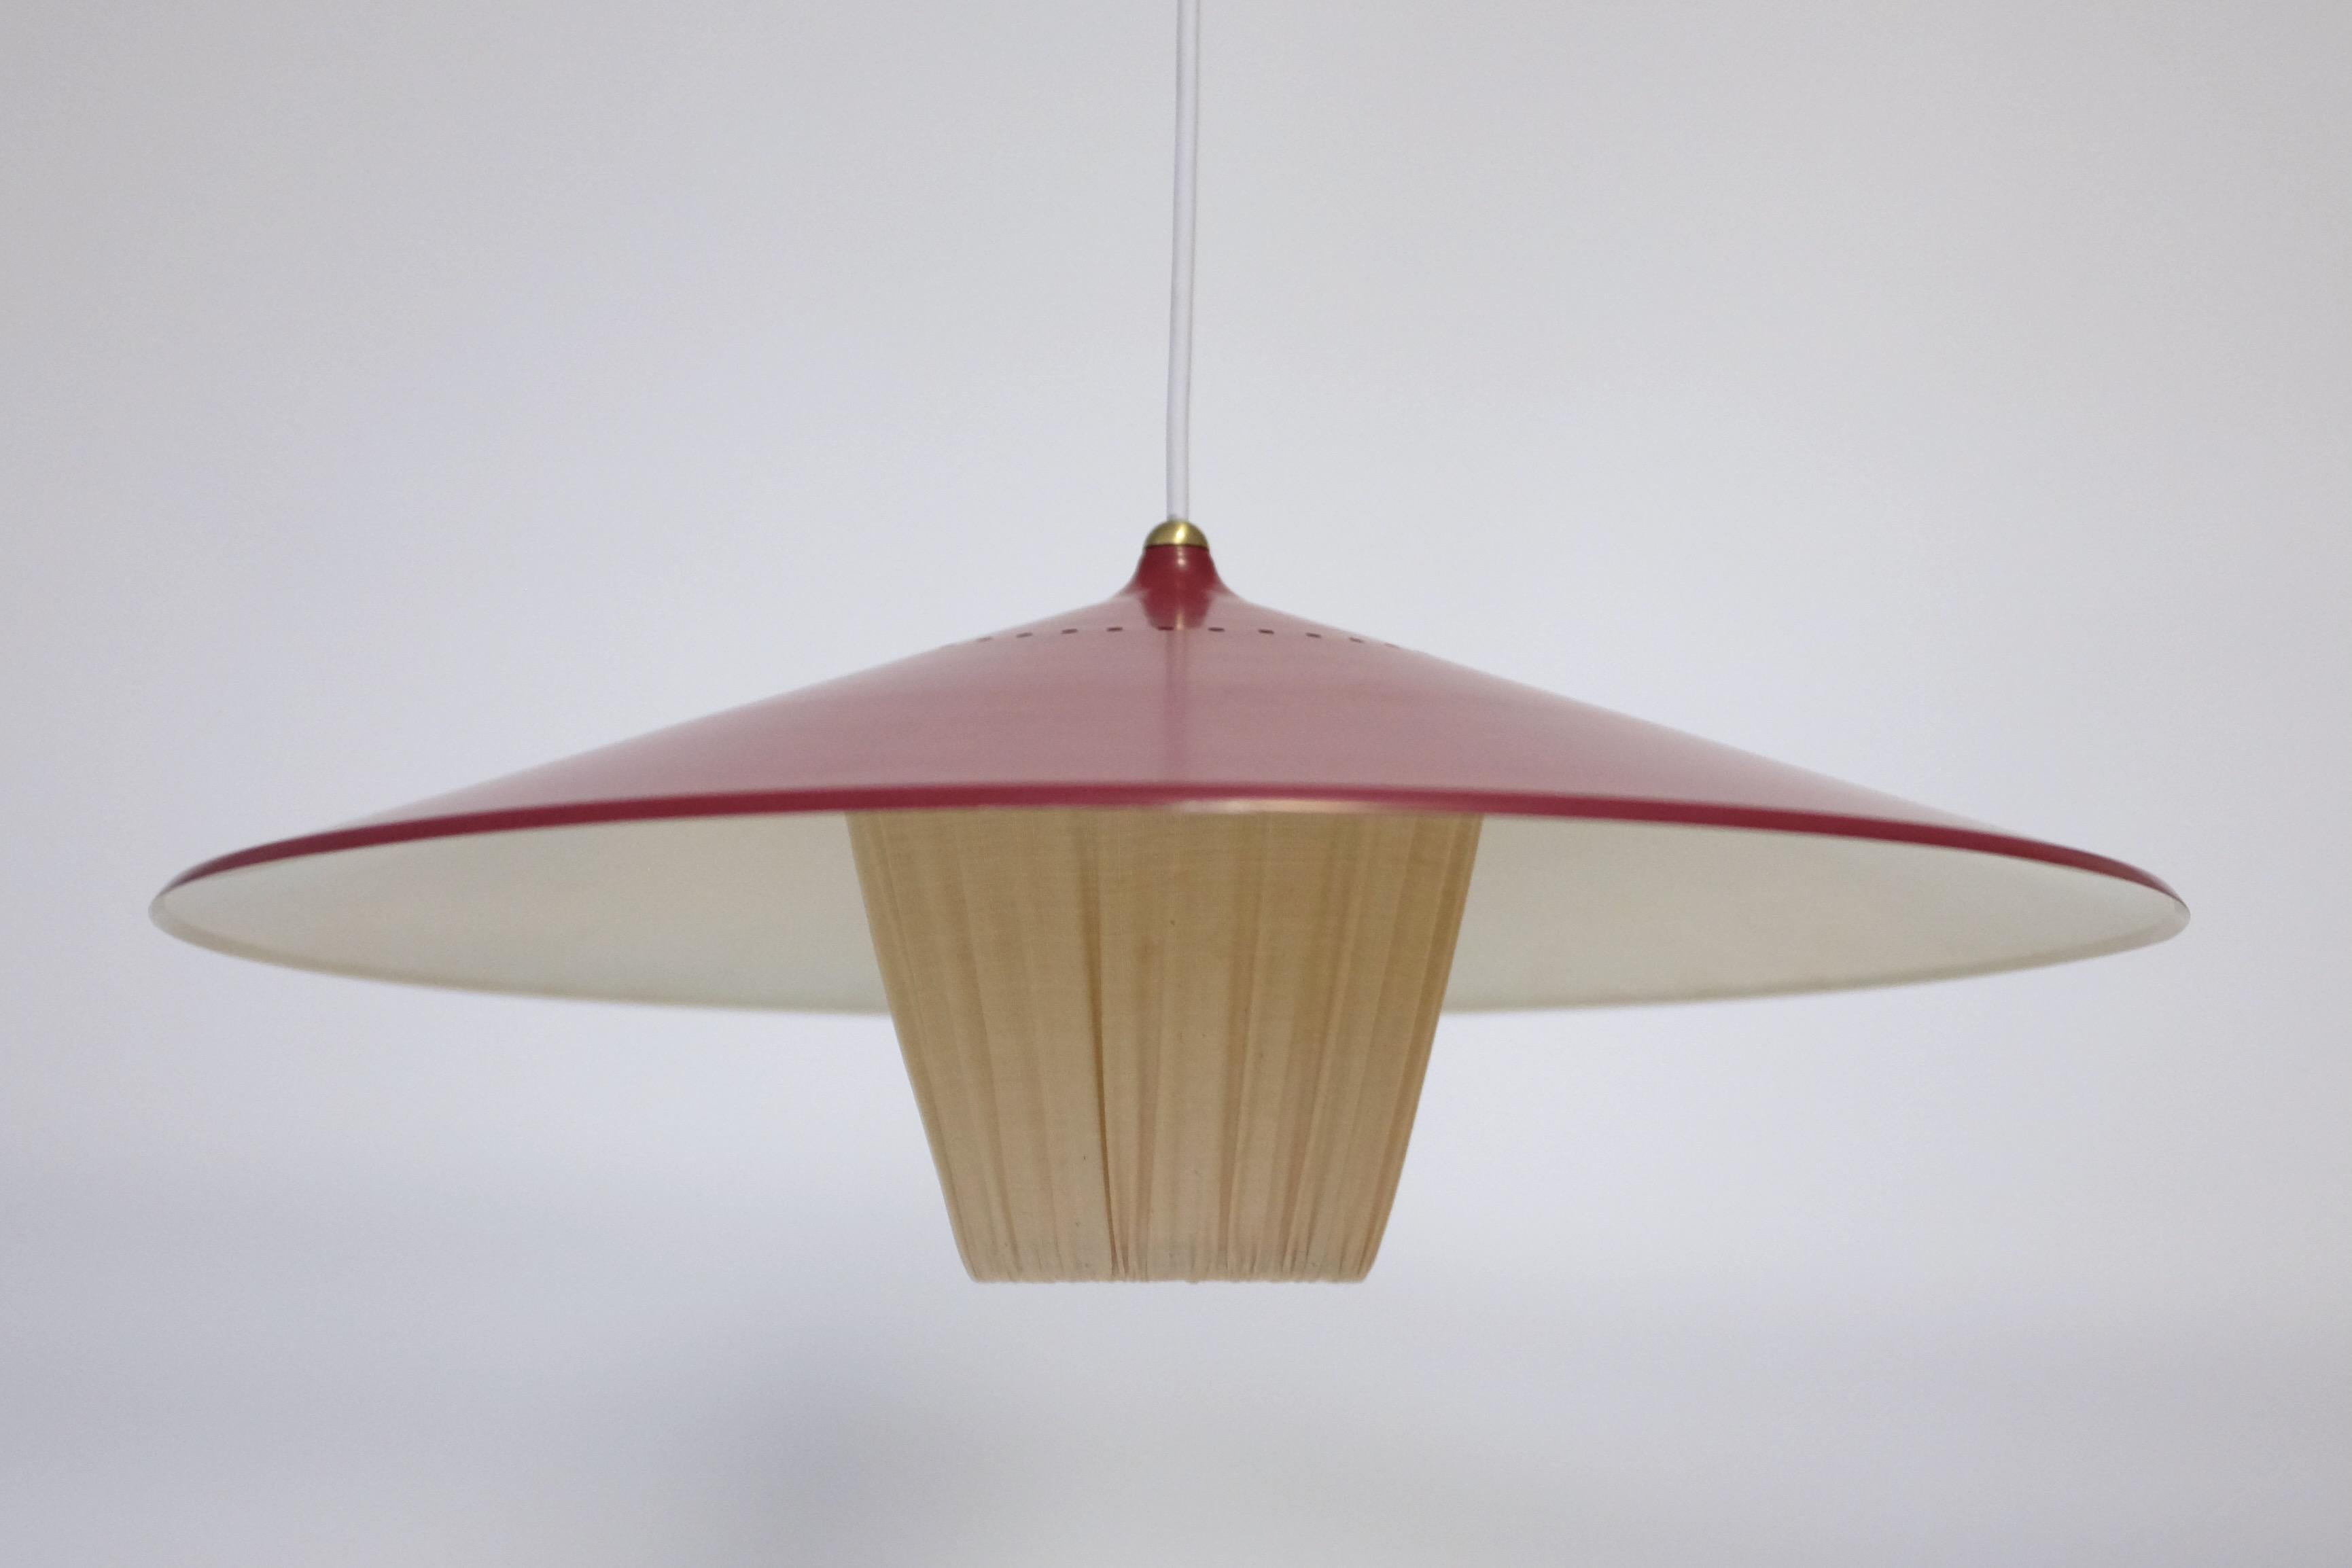 Vintage 1950s Swedish ceiling lamp possibly by Bergboms, Sweden. Beautiful red colored on the lamp shade with brass details and a cream colored fabric pendant underneath which focuses the light. Adjustable height through the cord with a total length